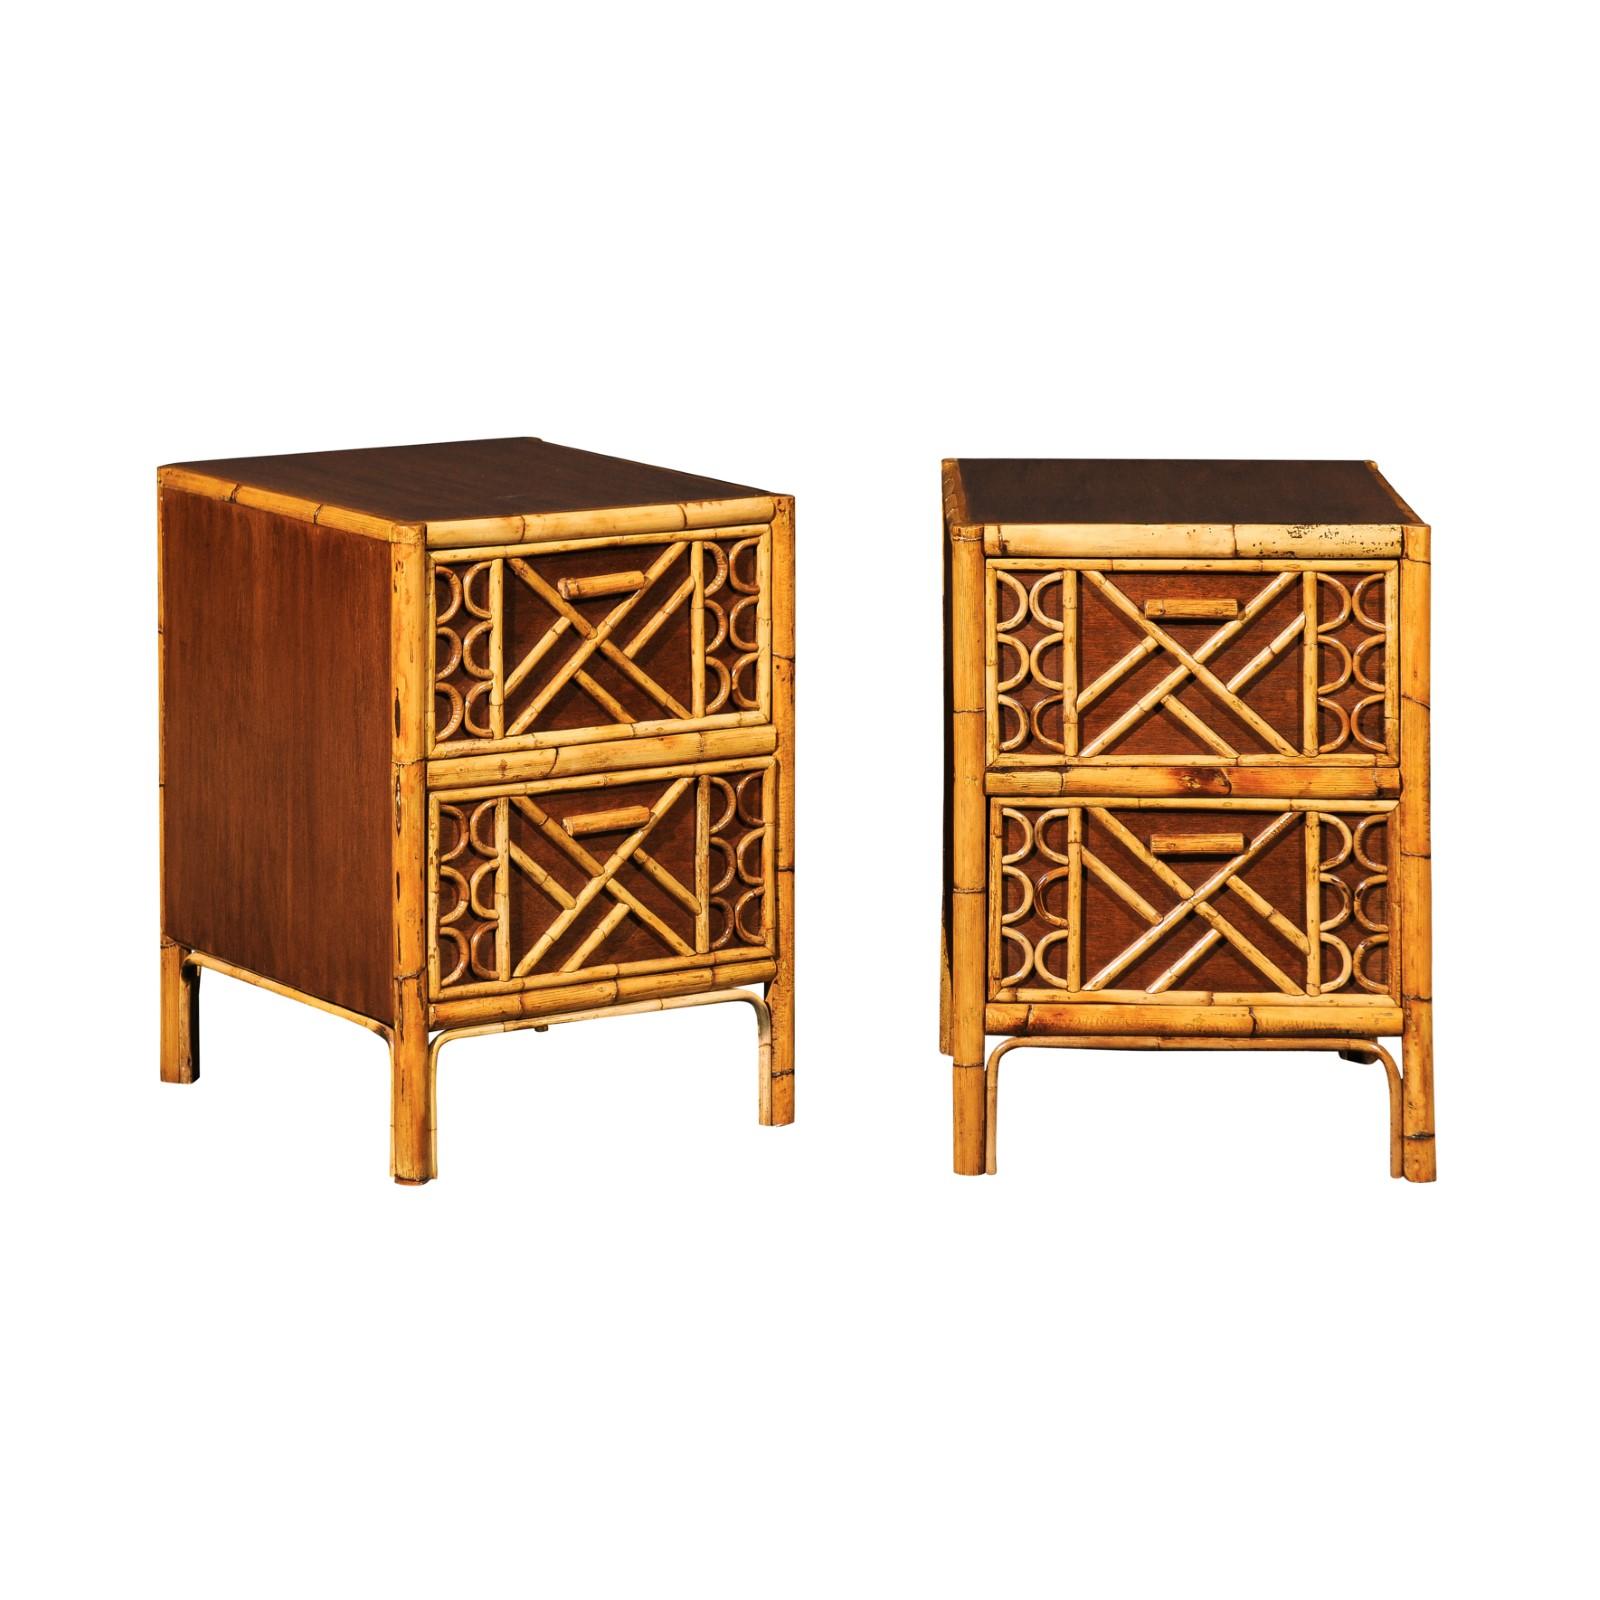 These magnificent end tables are shipped as professionally photographed and described in the listing narrative: Meticulously professionally restored and completely installation ready.

A jaw-dropping pair of organic end tables or night stands,